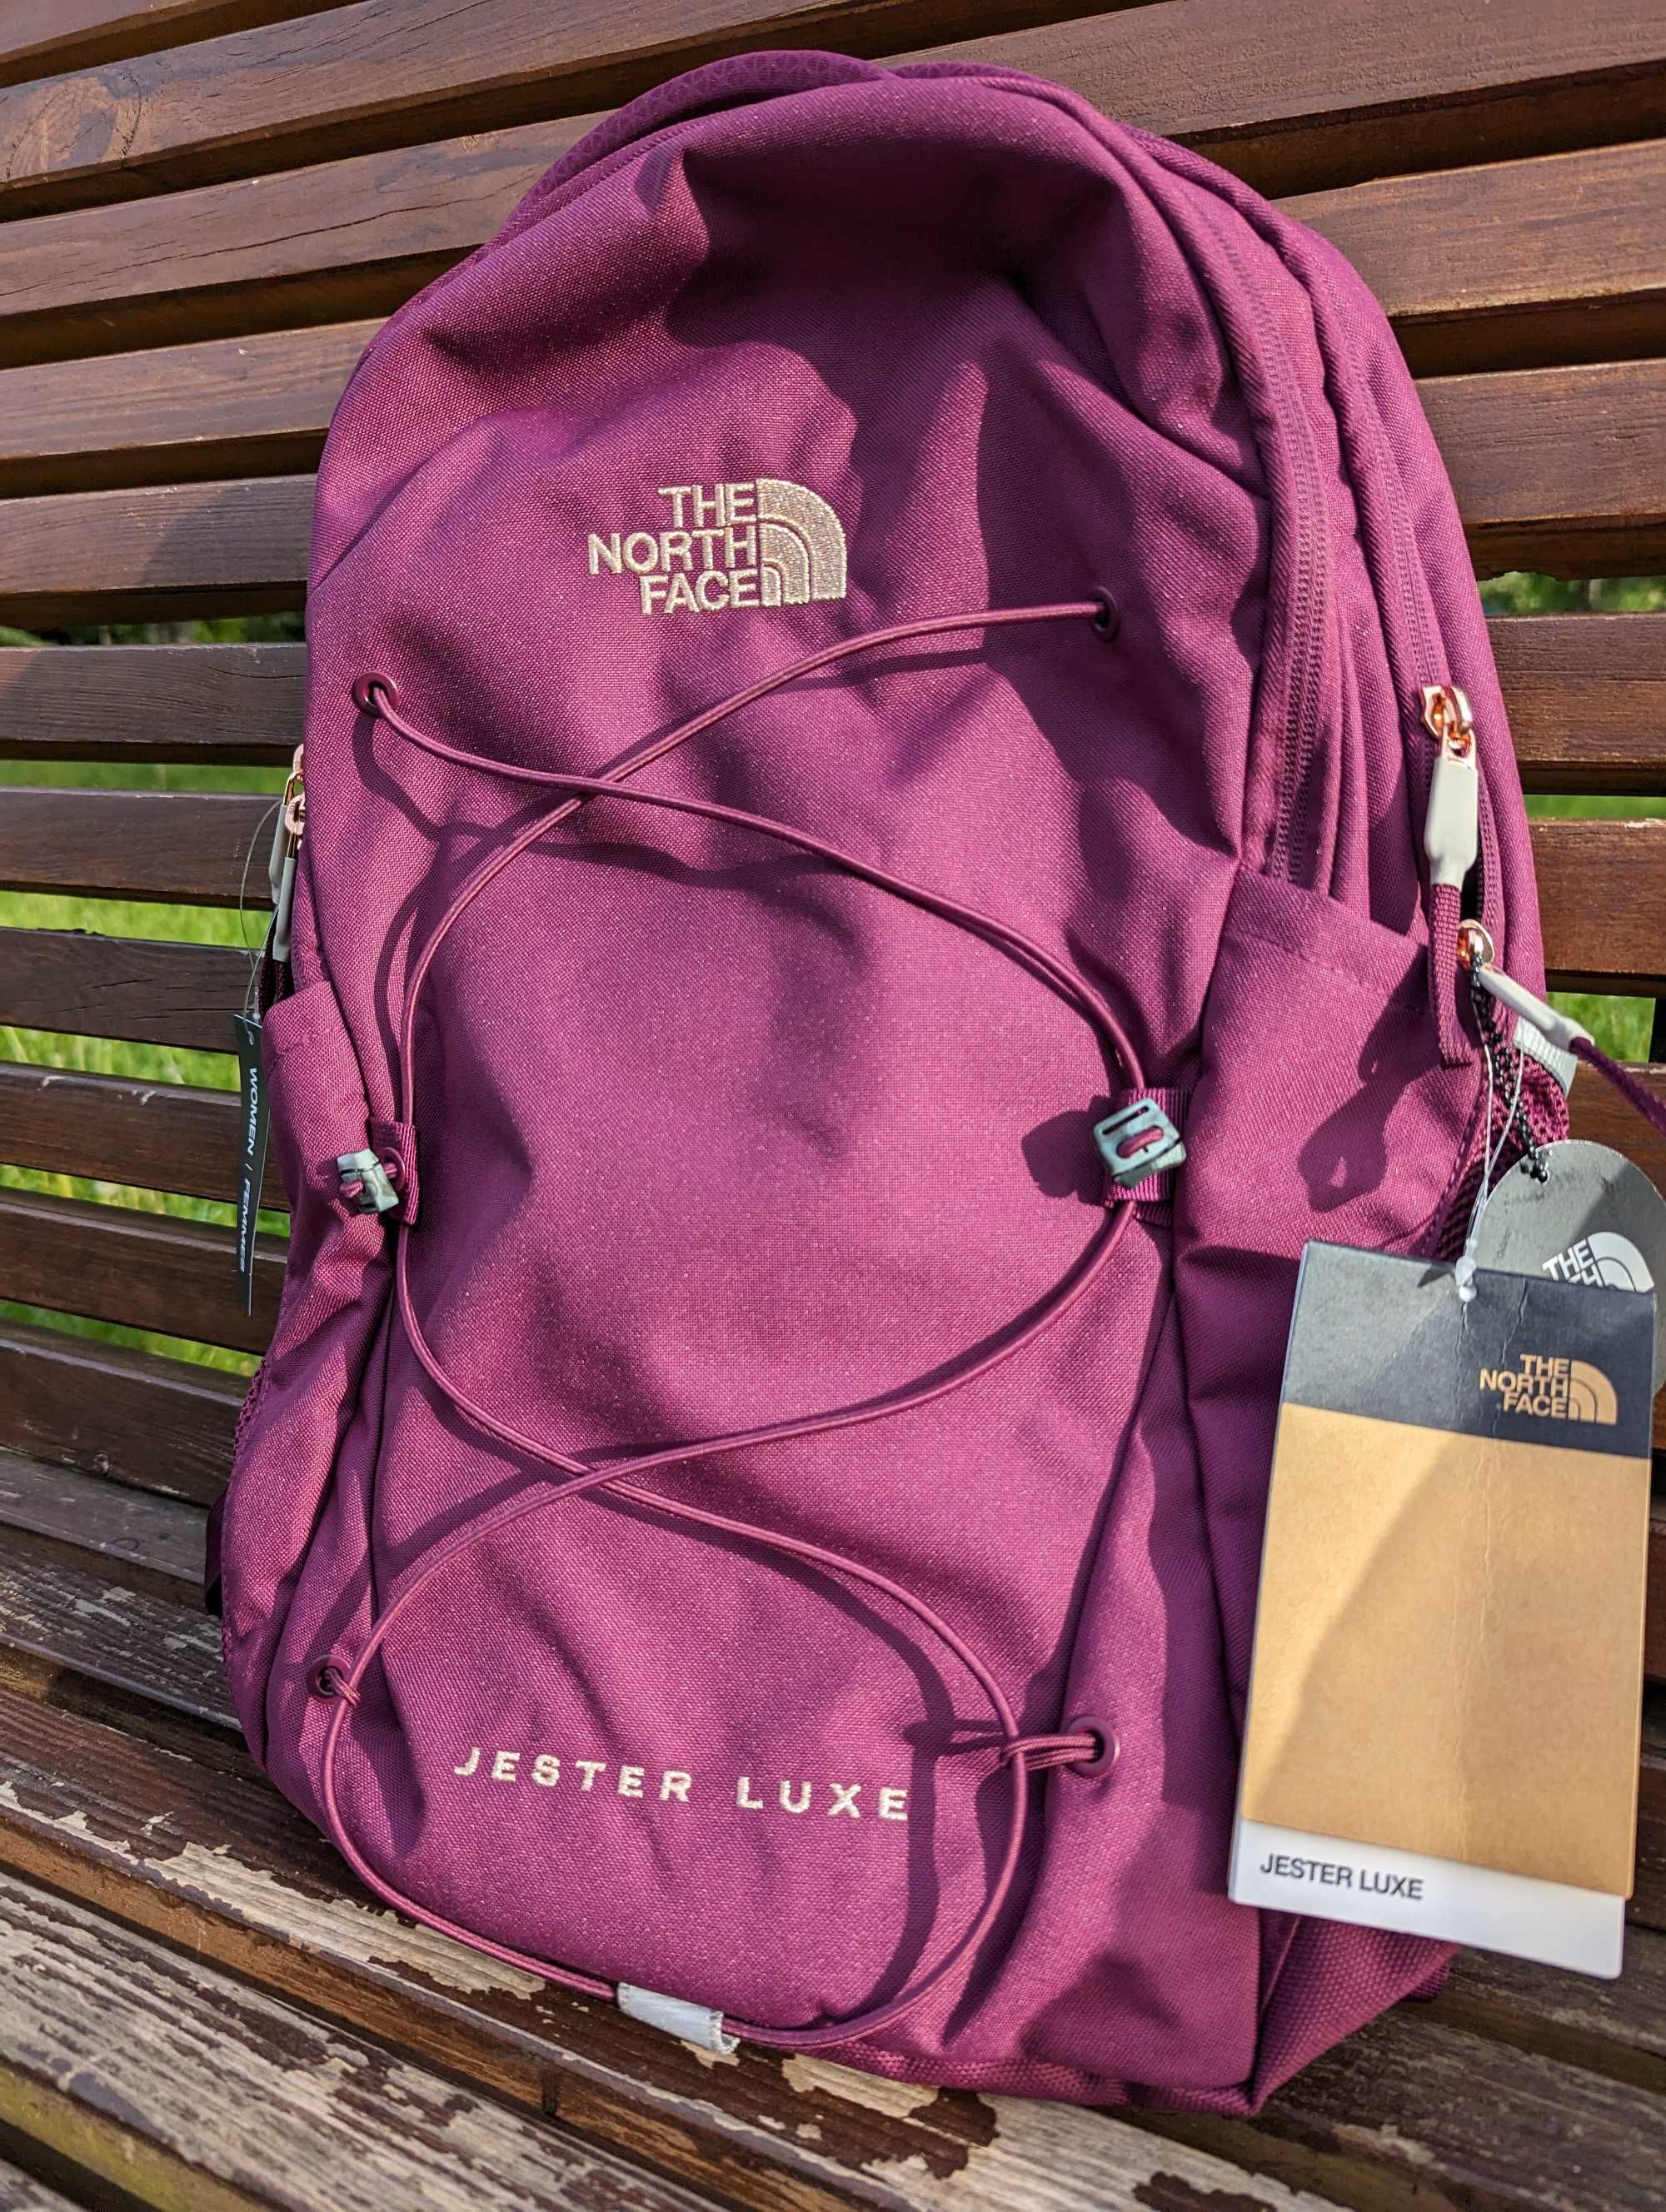 The North Face Jester Luxe Backpack. Женский рюкзак. Оригинал. Новый